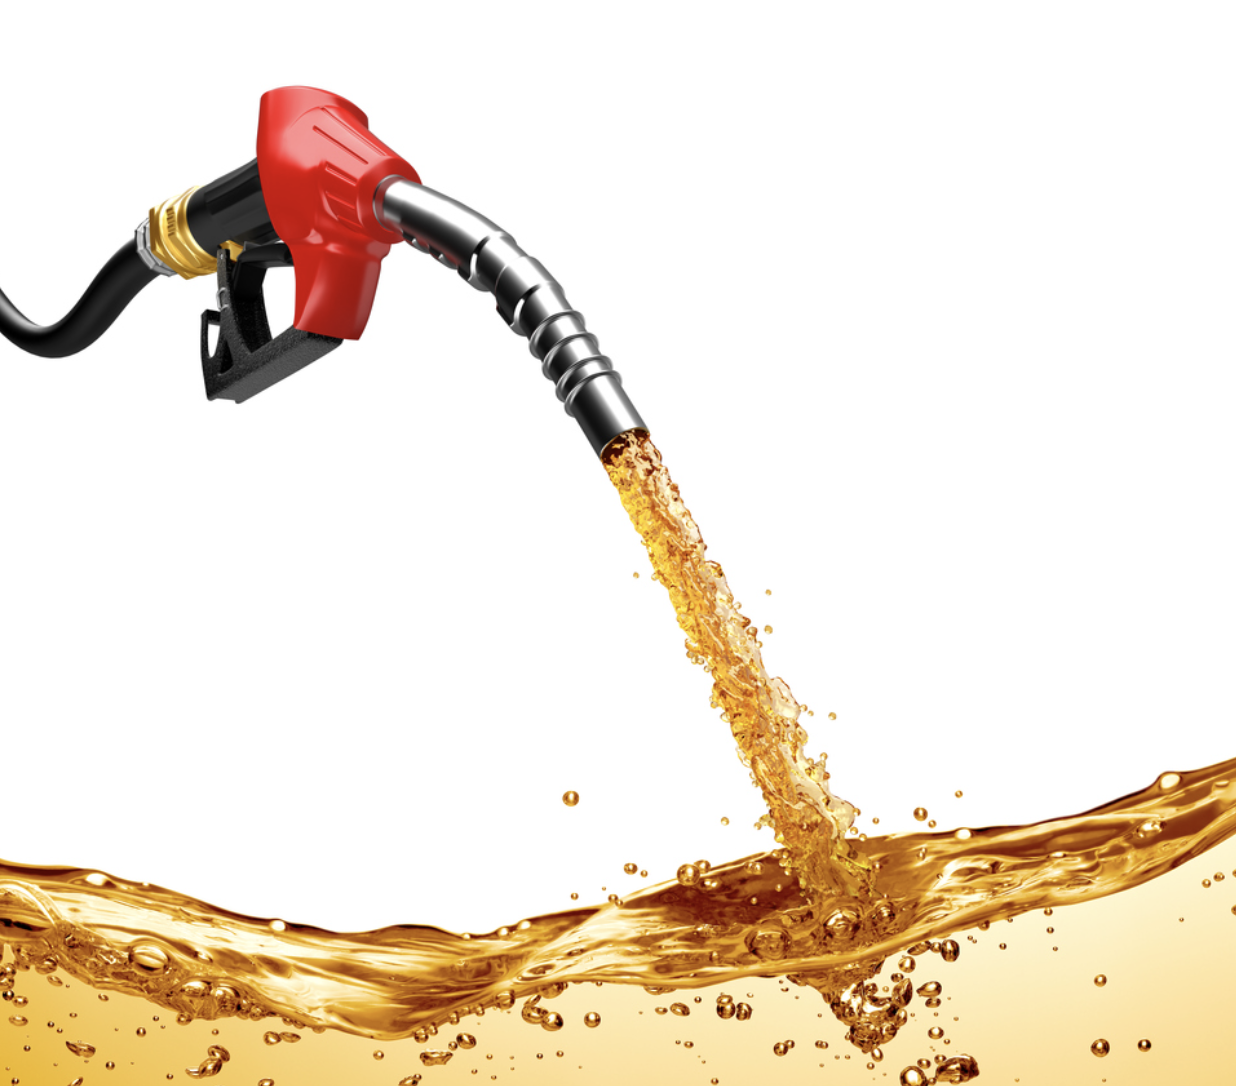 Red handled fuel pump dispenses gas into an unseen pool as the golden-colored gas gets deeper and deeper.